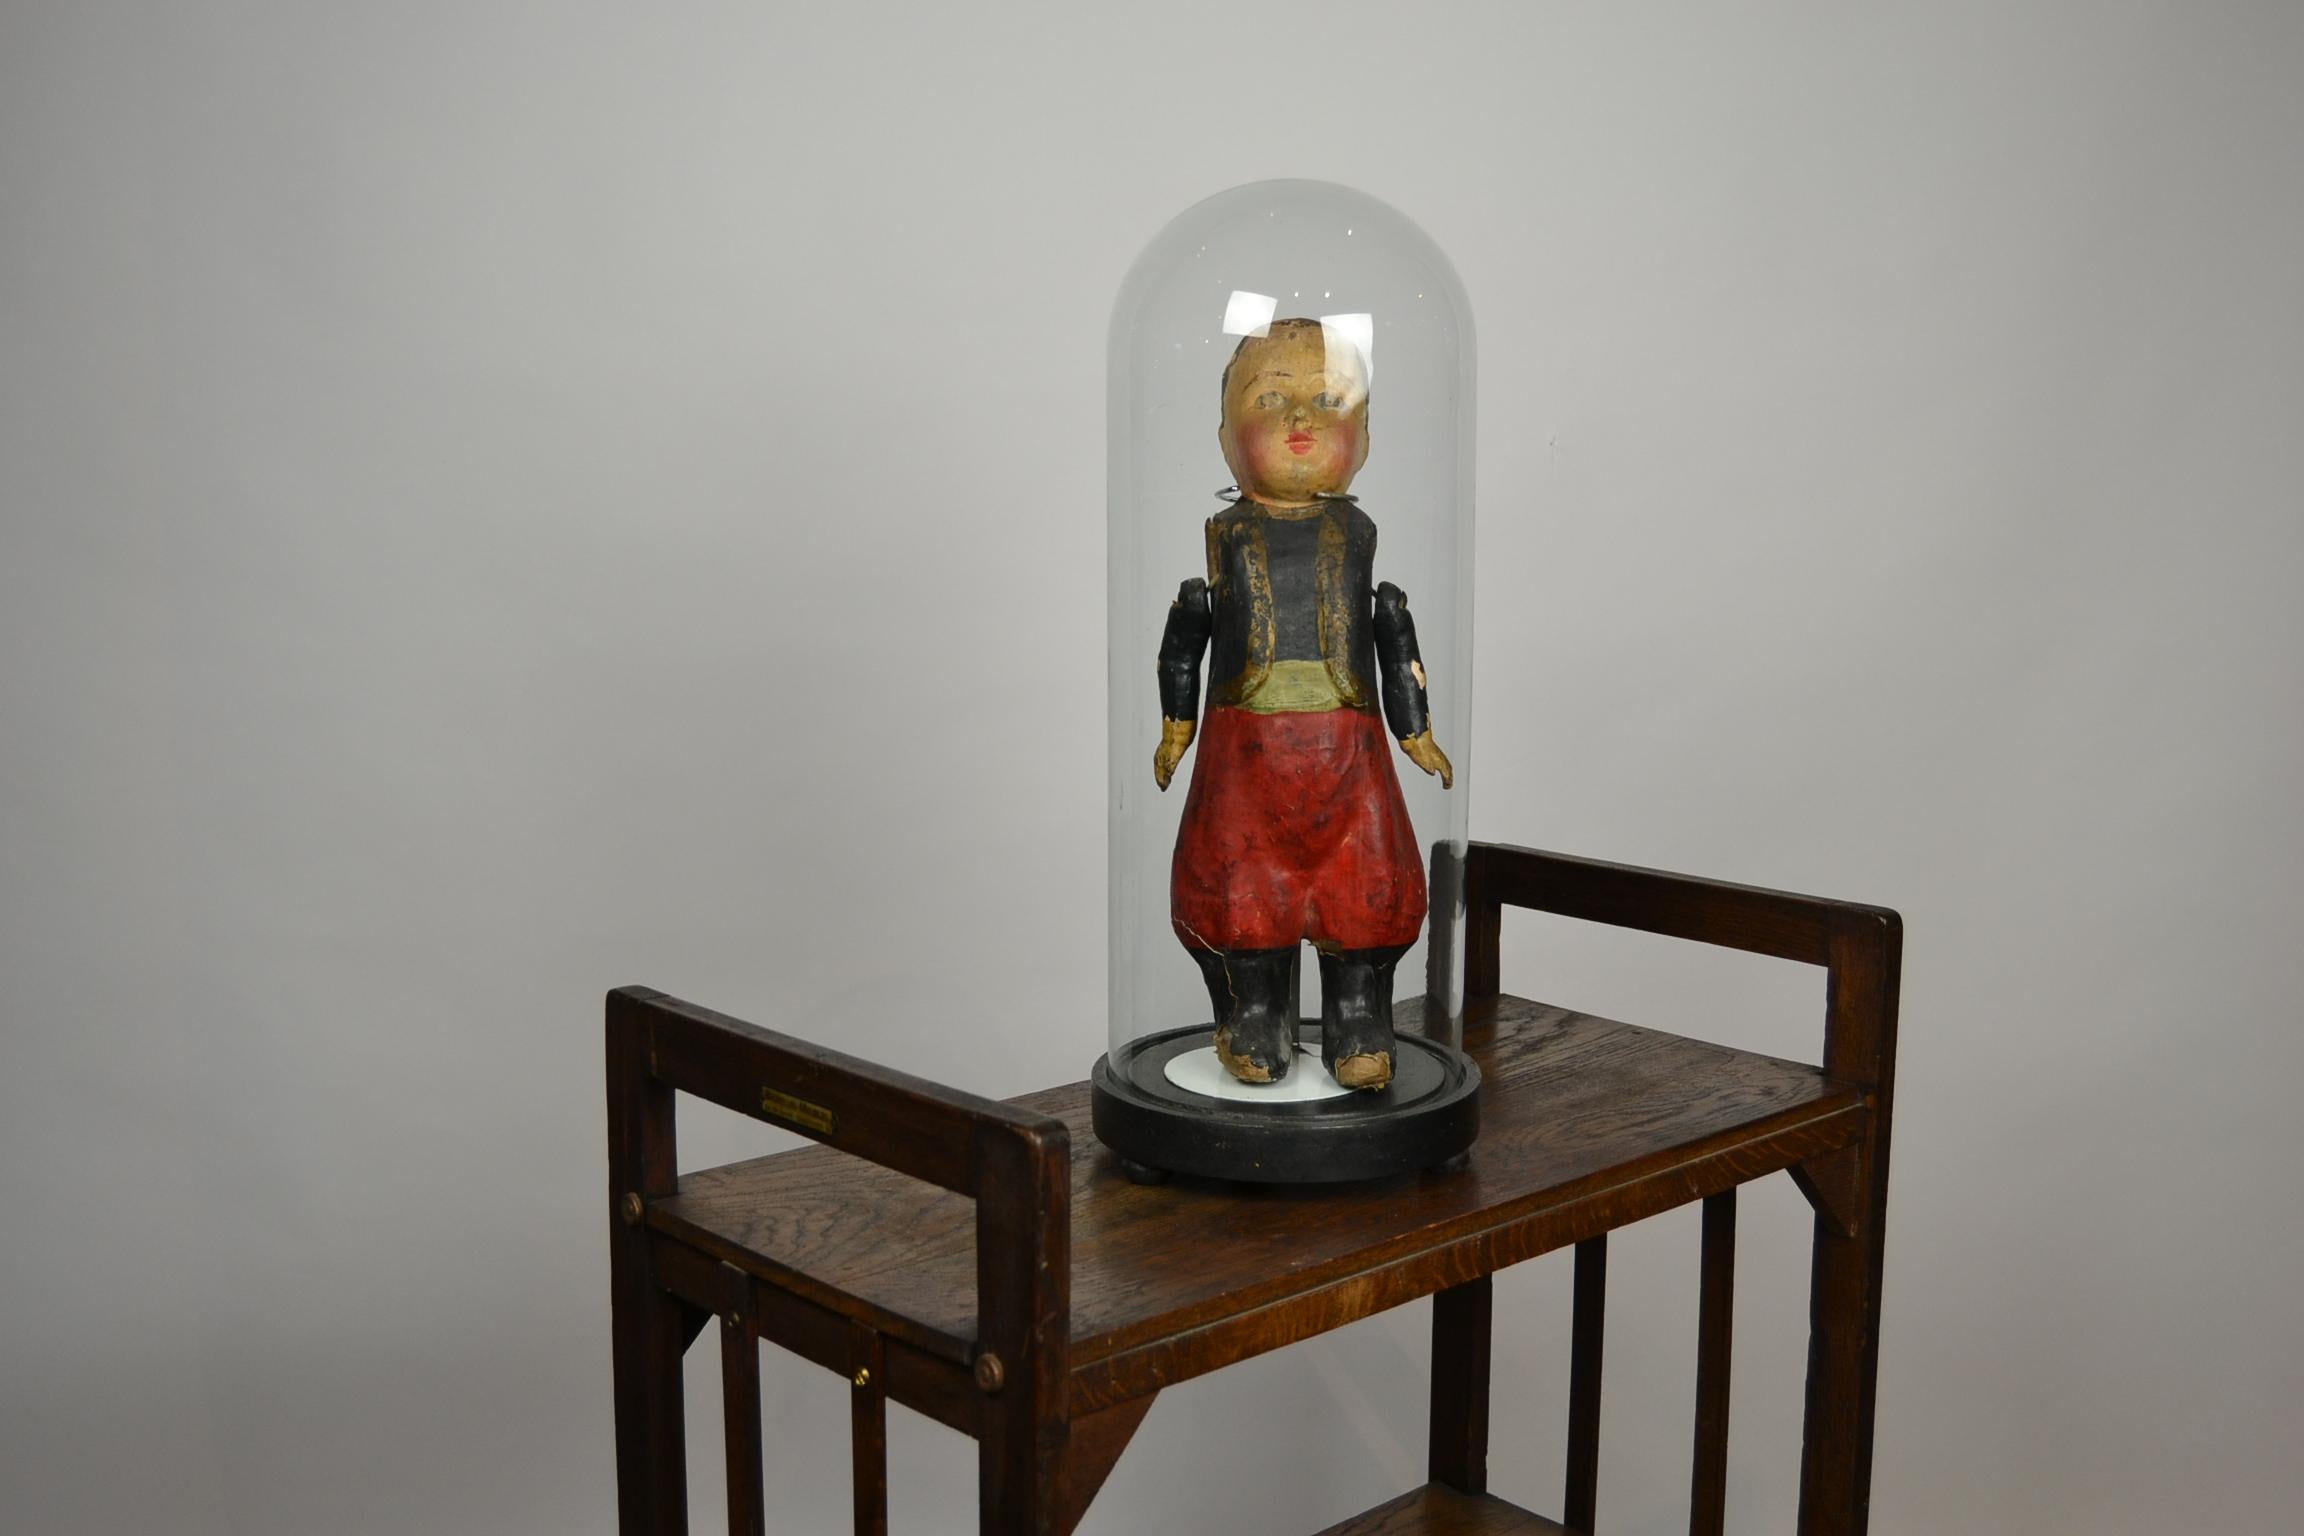 Great piece of Folk Art.
An antique doll made of papier-mâché, hand painted.
Through the years this French doll got a great old patina, so a lot of history and charm.
Represented and delivered underneath an antique hand blown glass dome.

The